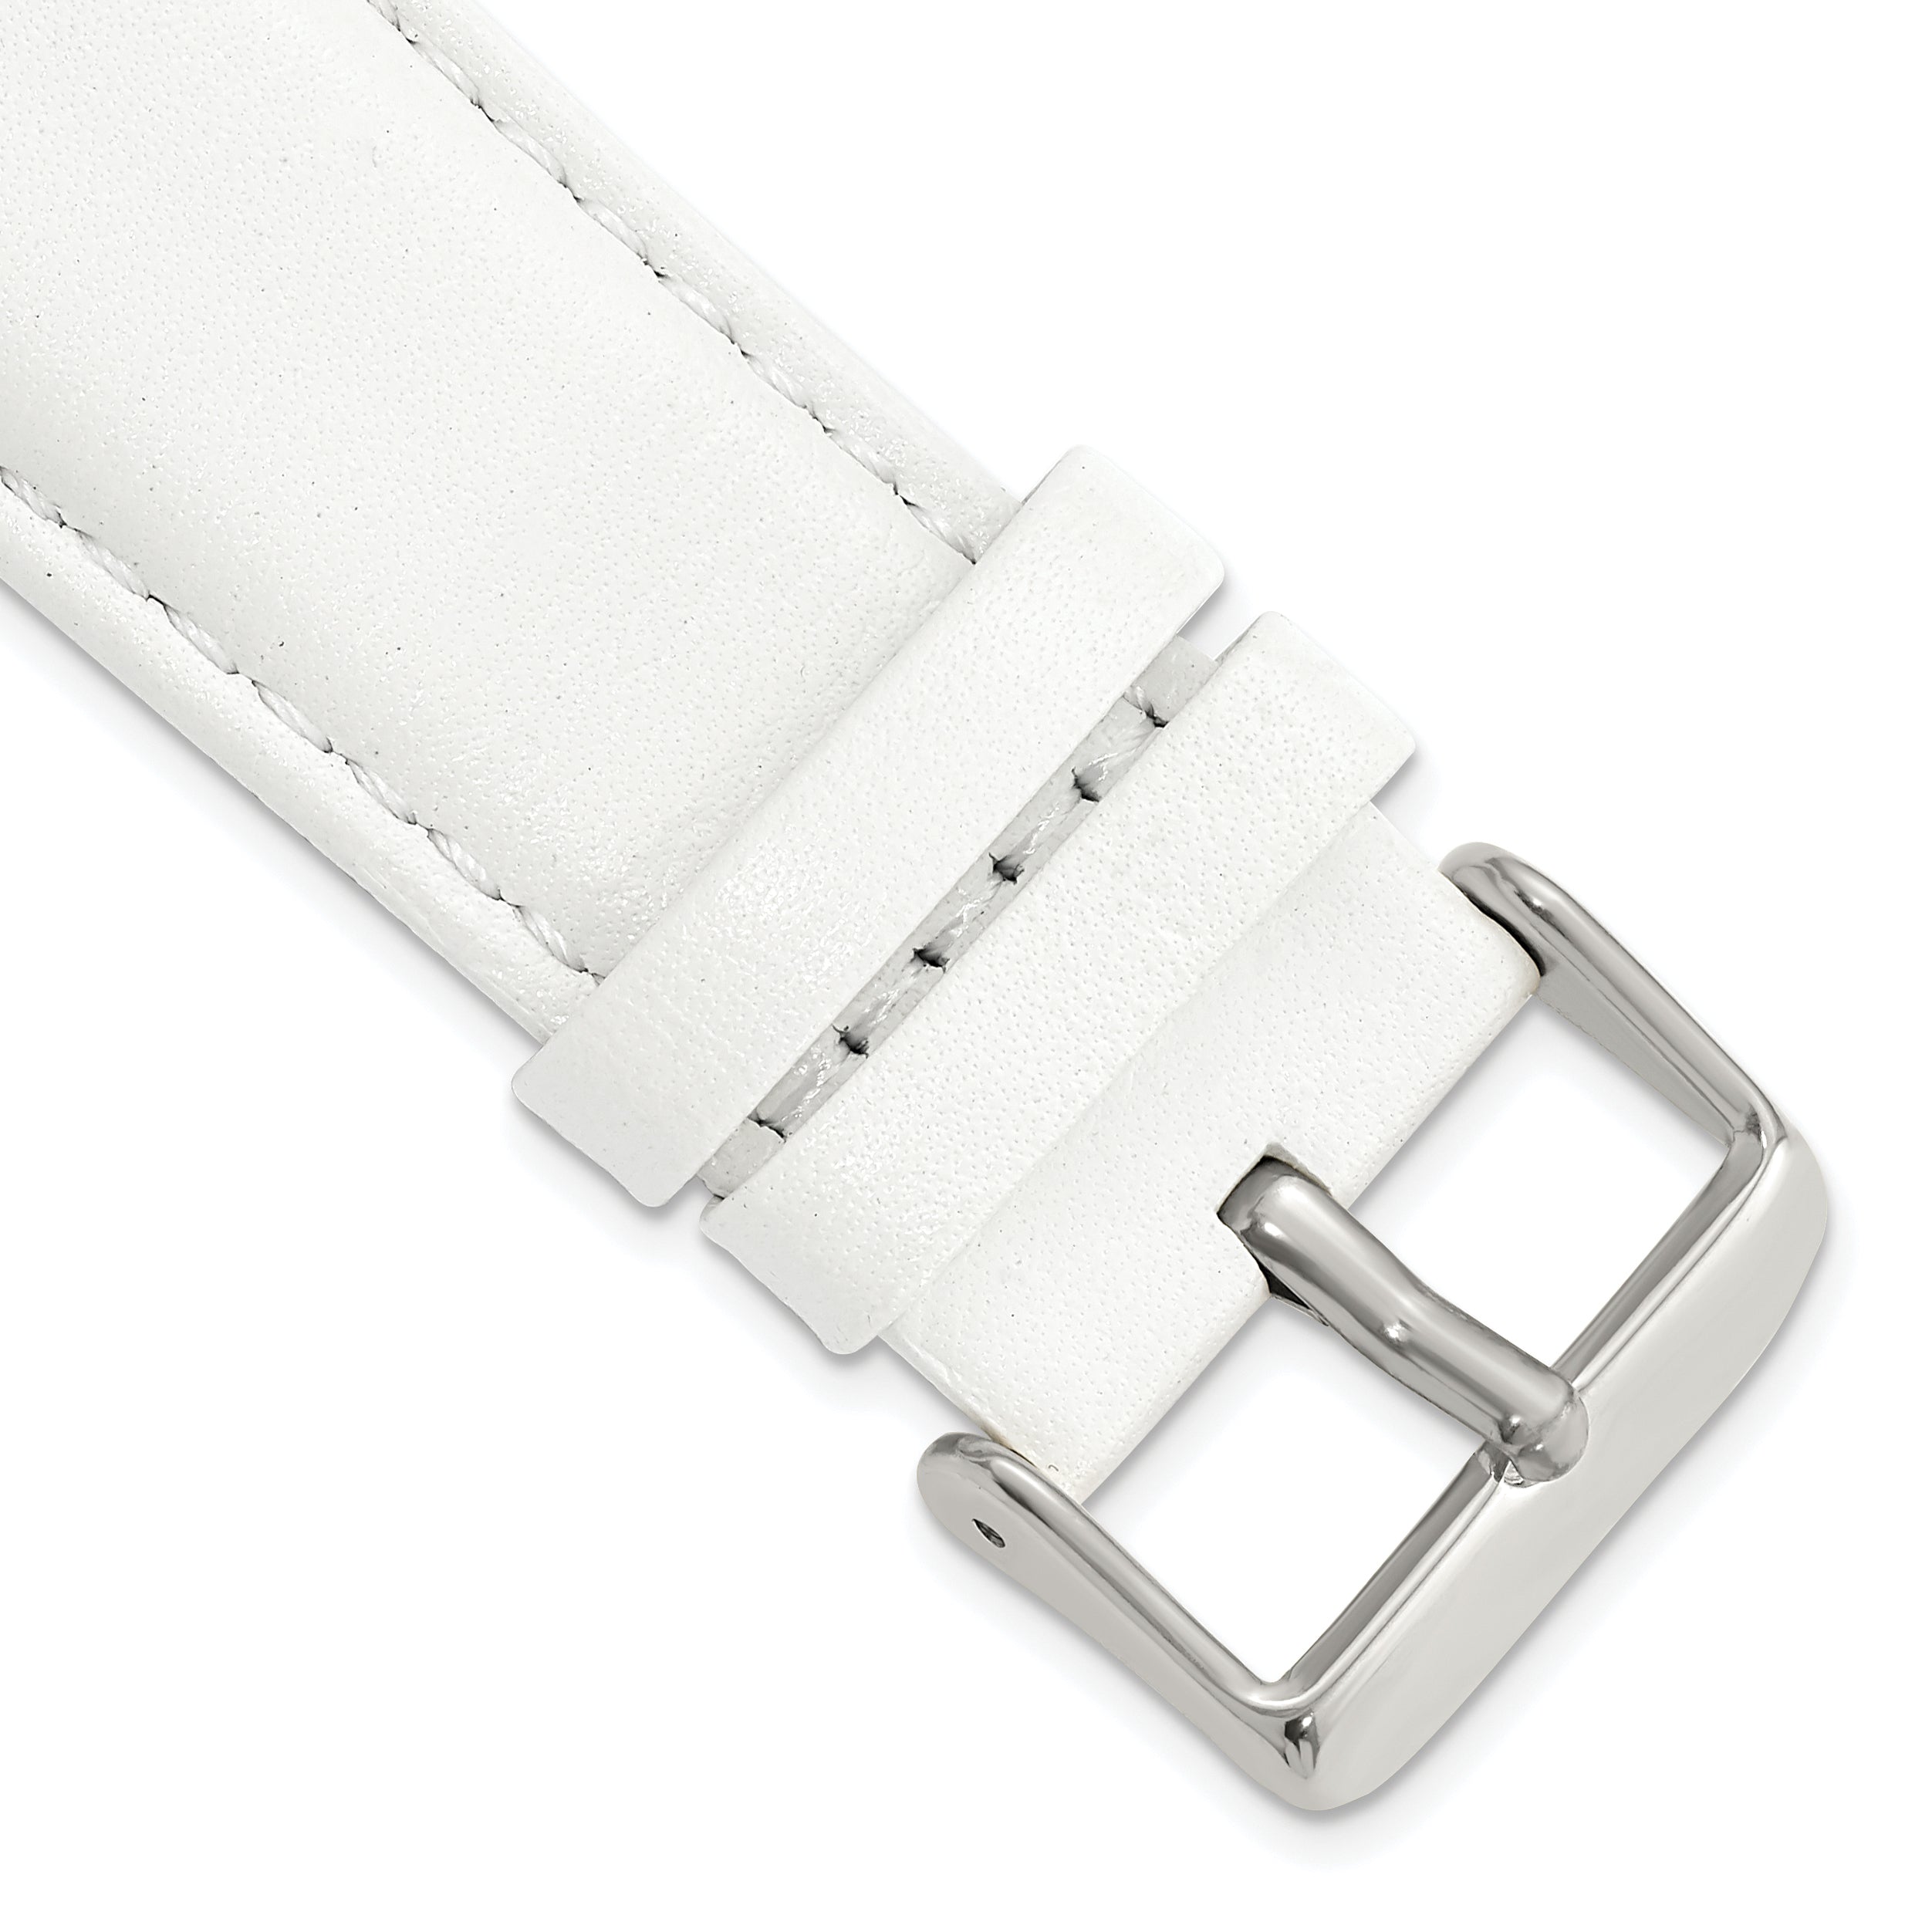 DeBeer 24mm White Glove Leather with Silver-tone Panerai Style Buckle 7.75 inch Watch Band